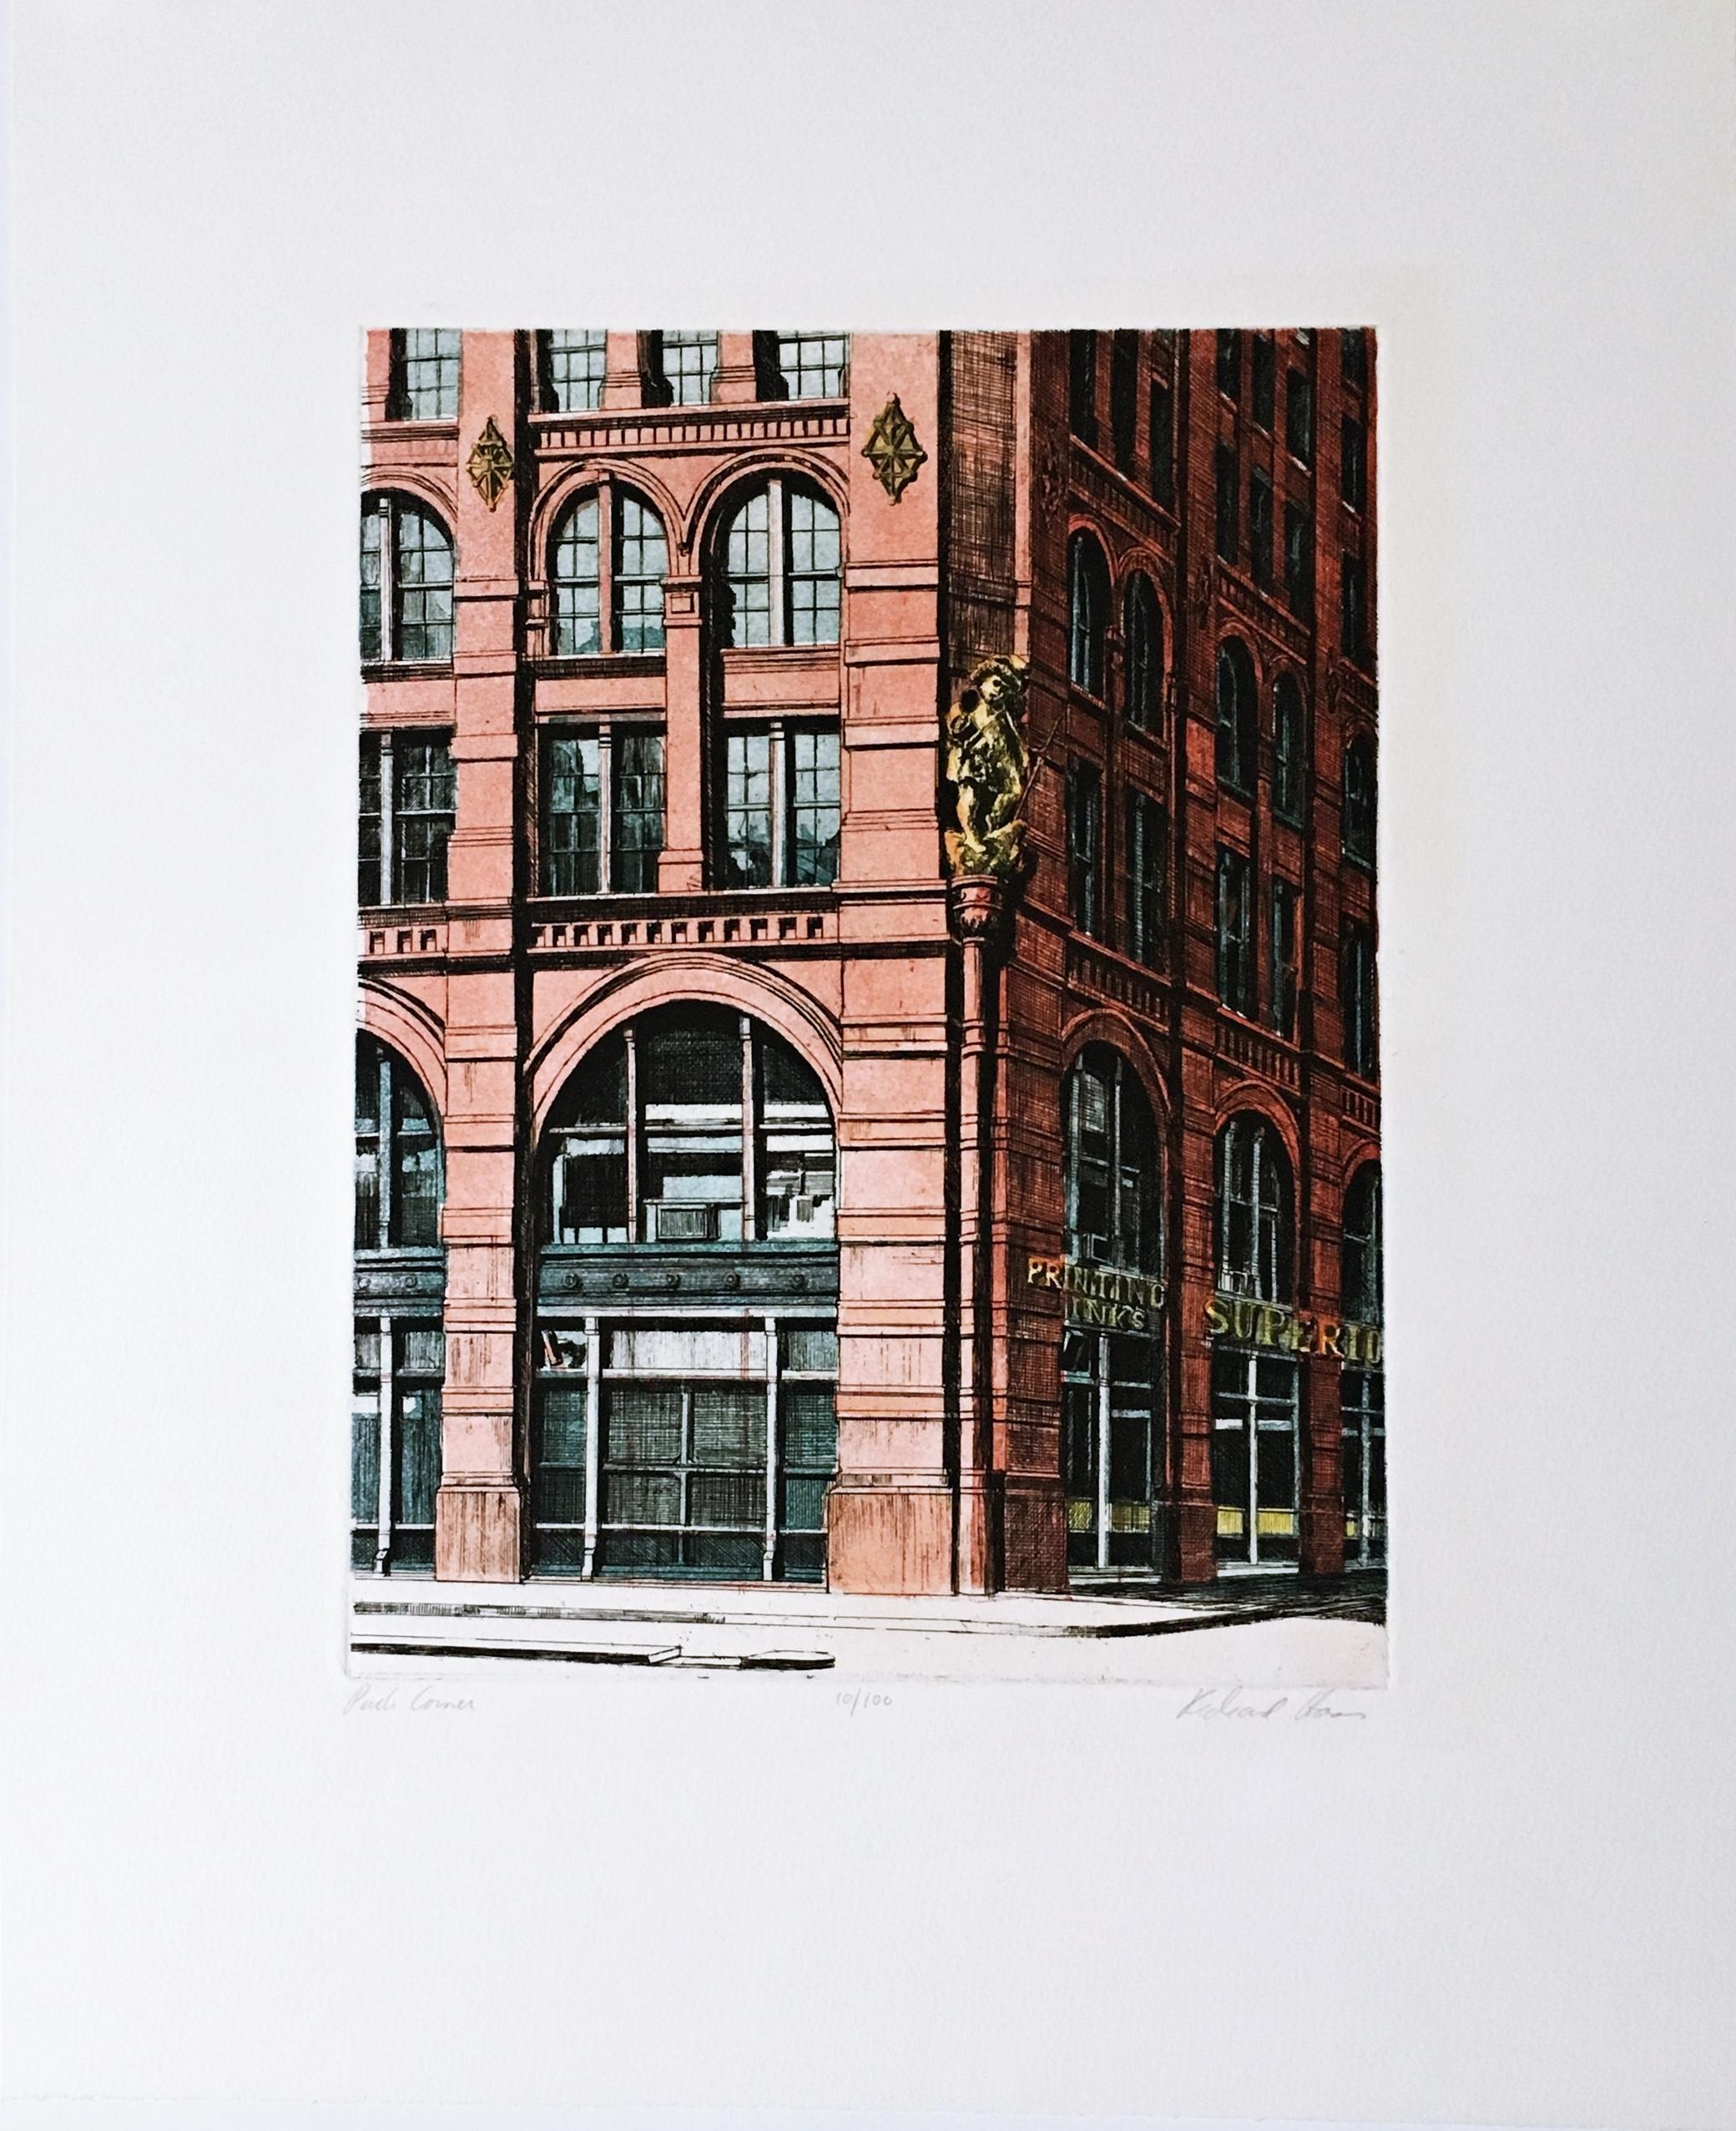 Puck Corner, SOHO, New York signed & numbered 10/100 by top architectural artist - Realist Print by Richard Haas